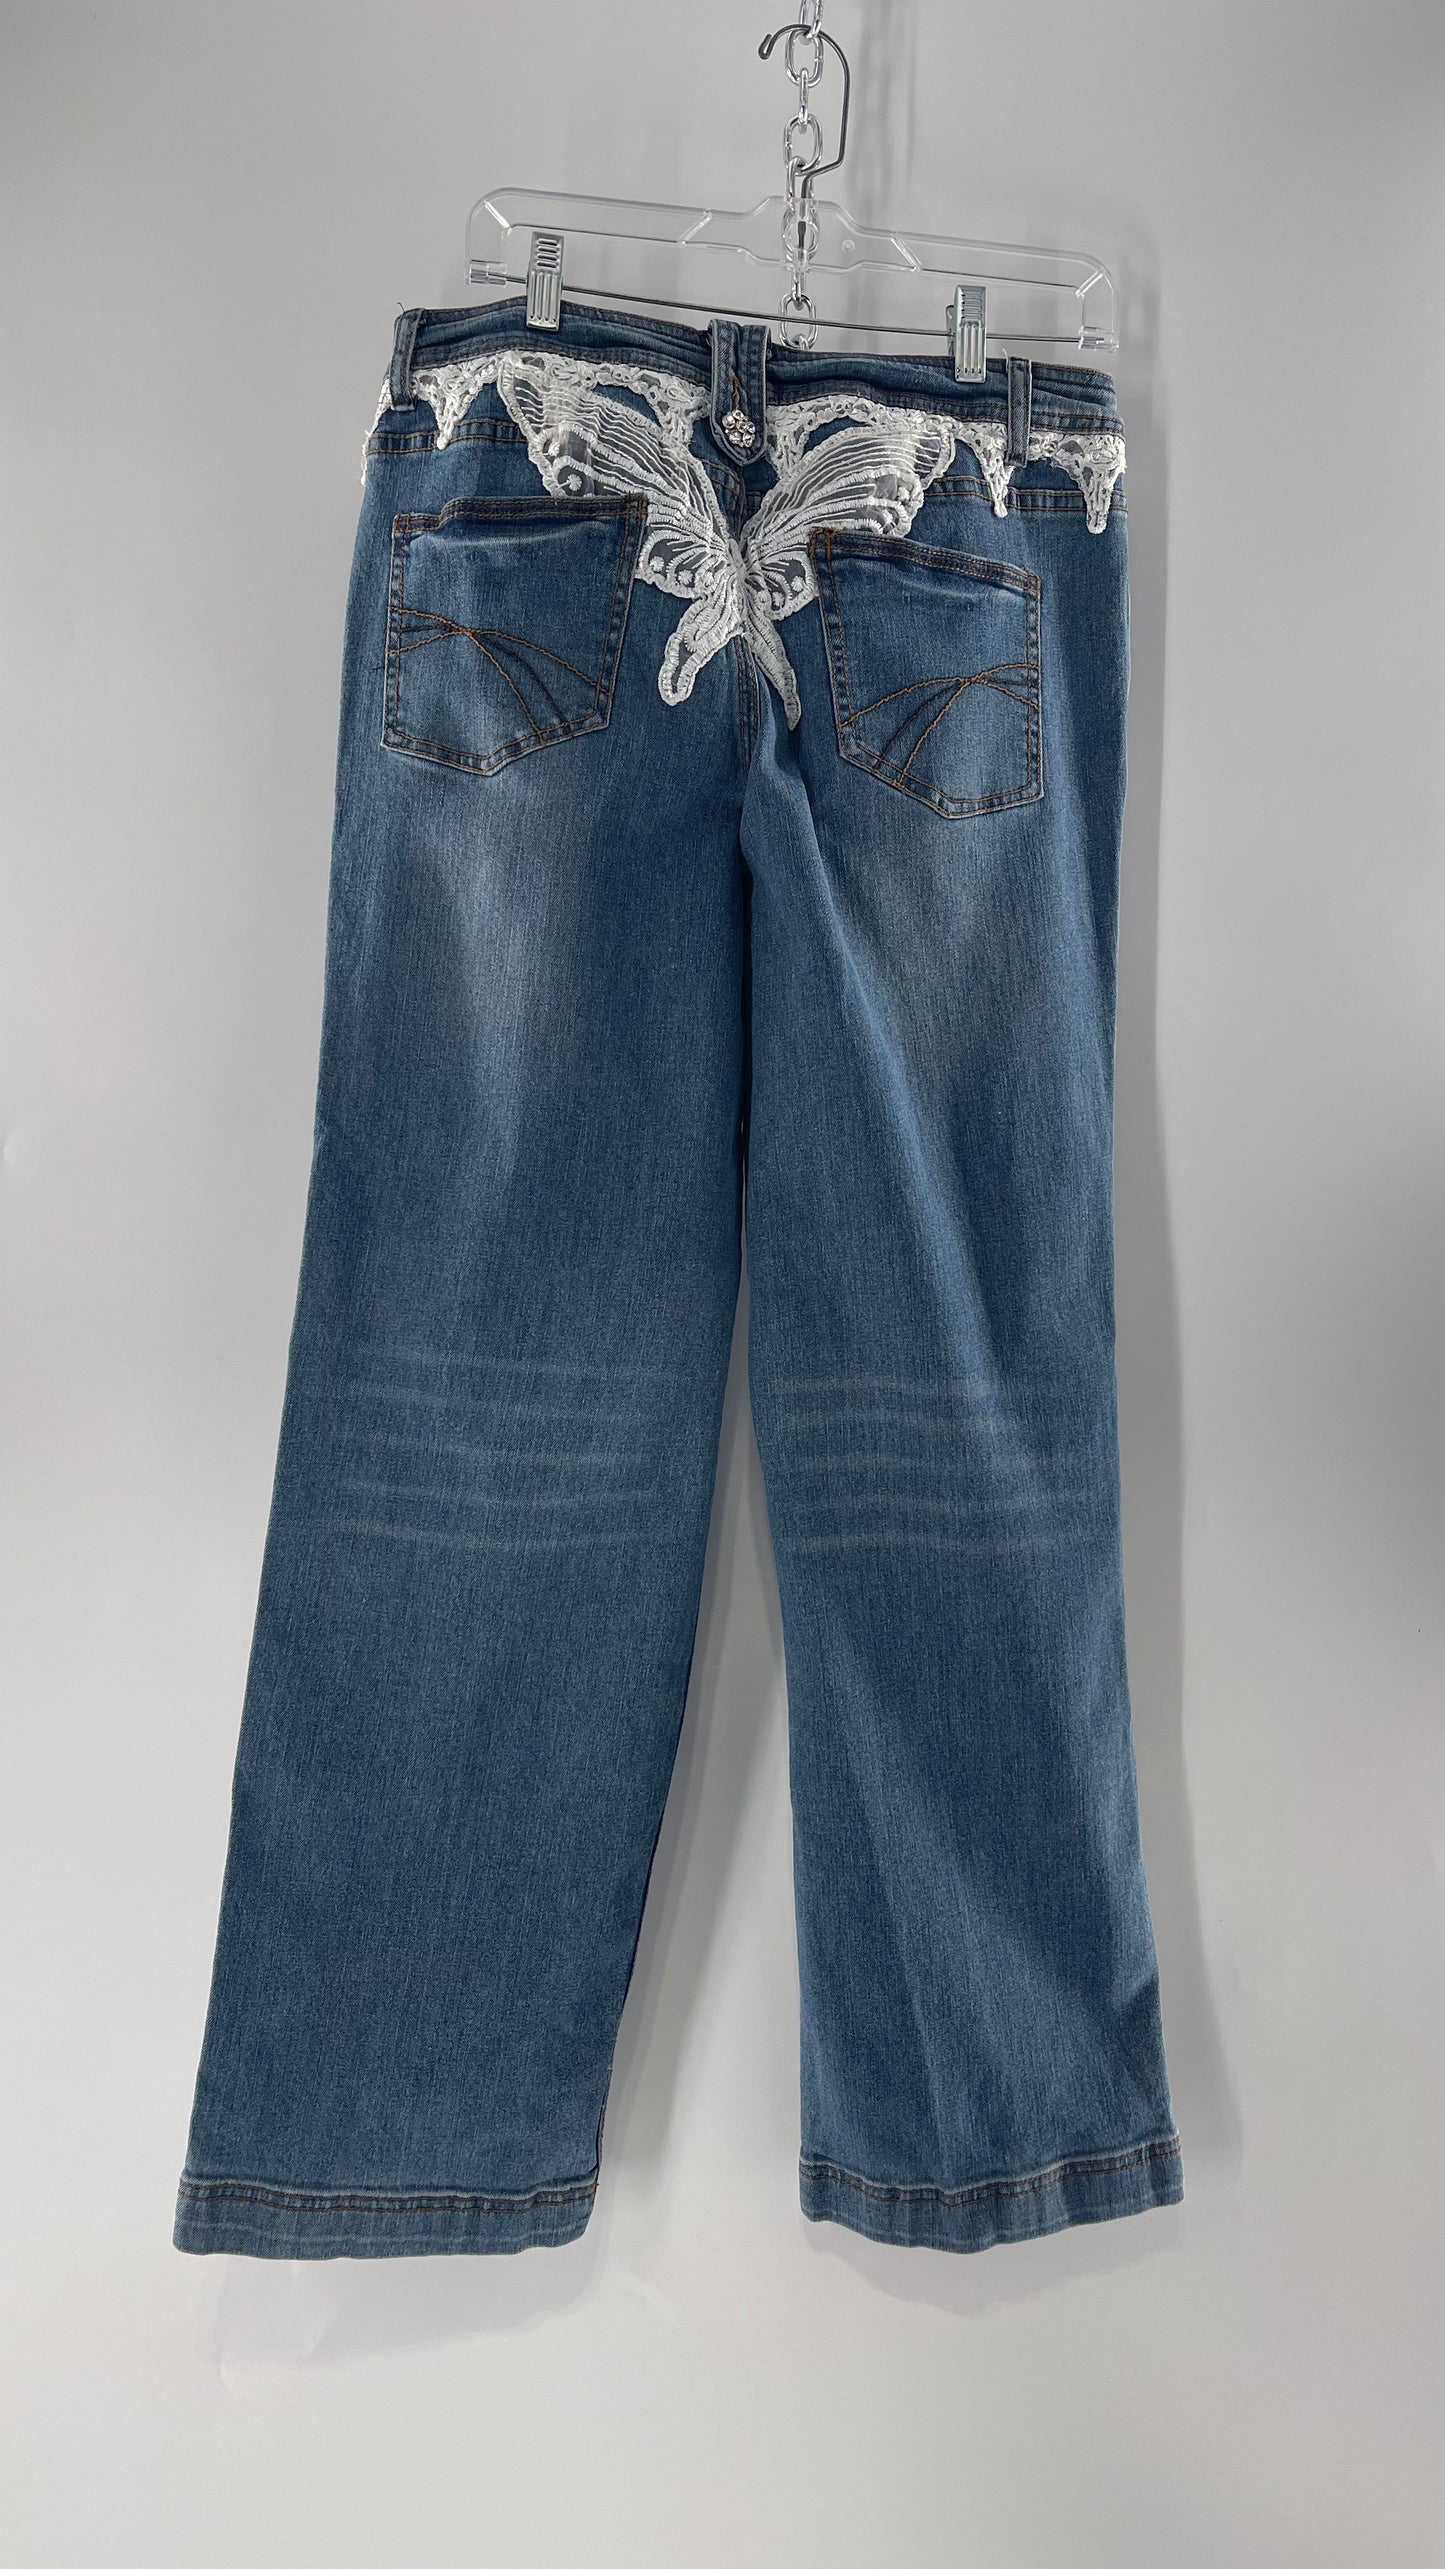 Vintage Midnight Velvet Light Wash Jeans with White Lace Butterfly on Bum (12)